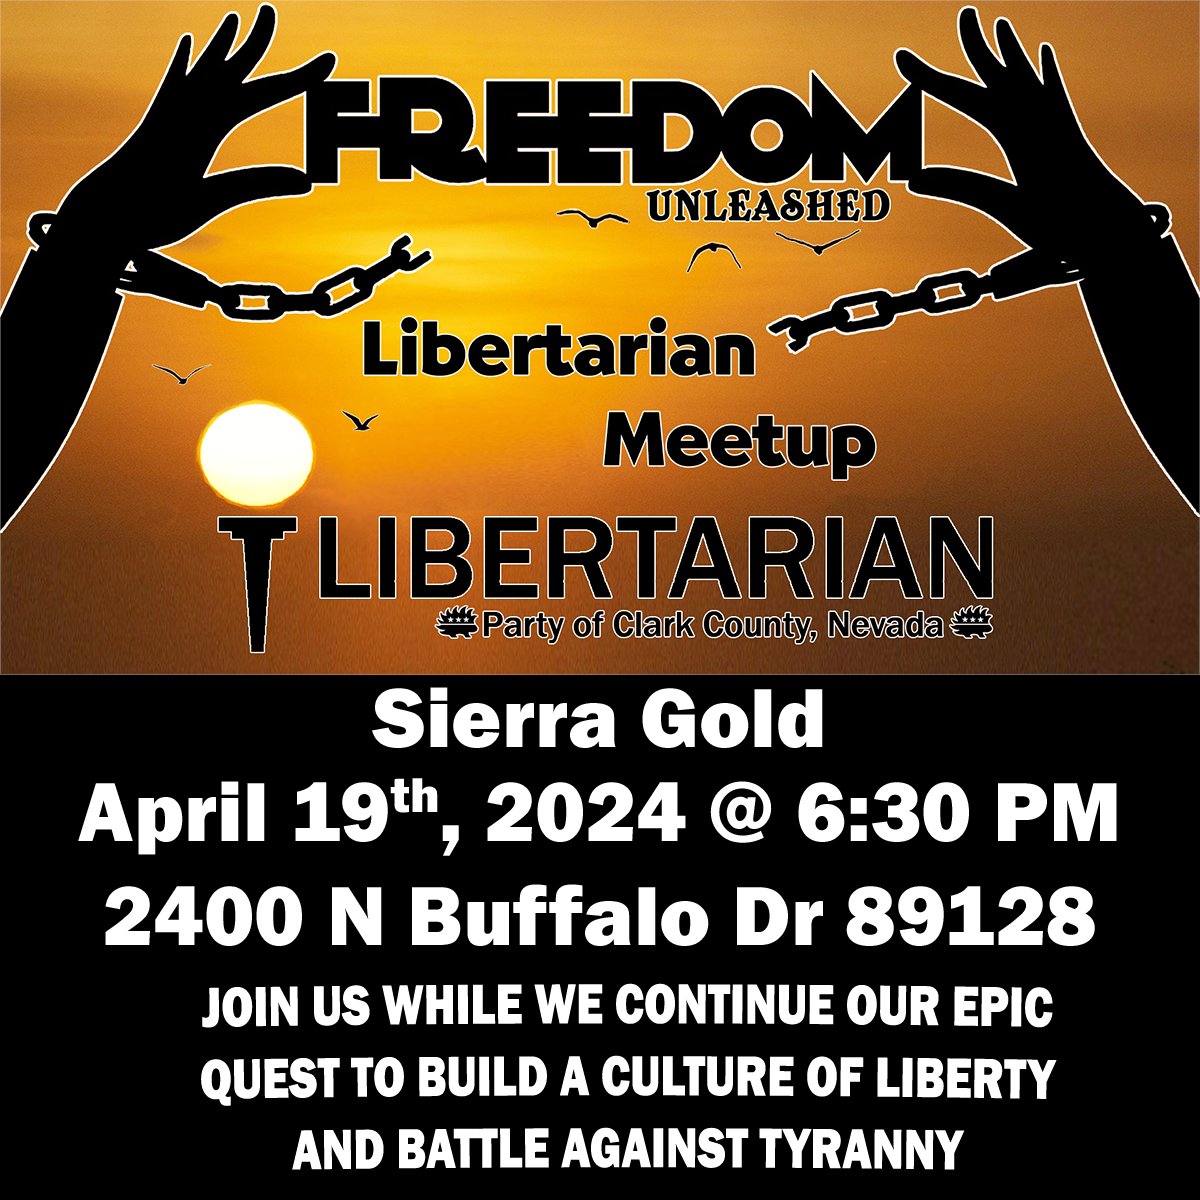 Liberty curious? Want to know what the Libertarian Party is all about? Looking for new friends that are tired of government overreach? If so, come hang out at Sierra Gold on N. Buffalo & Smoke Ranch! When: April 19th, 2024 at 6:30pm - 10:30pm Where: Sierra Gold on Buffalo and…